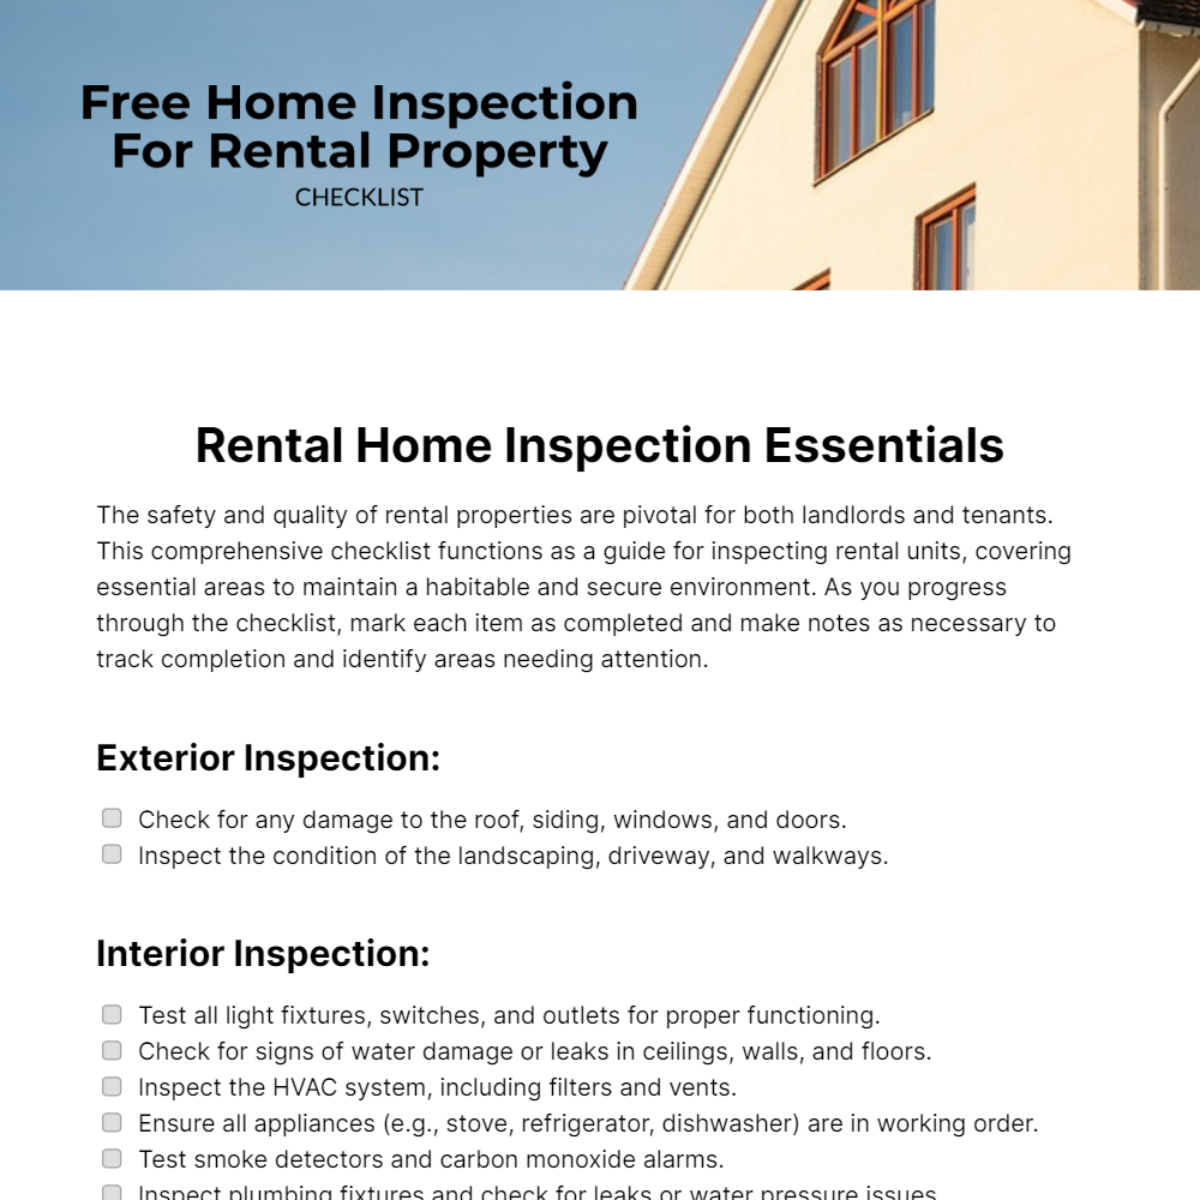 Home Inspection Checklist For Rental Property Template